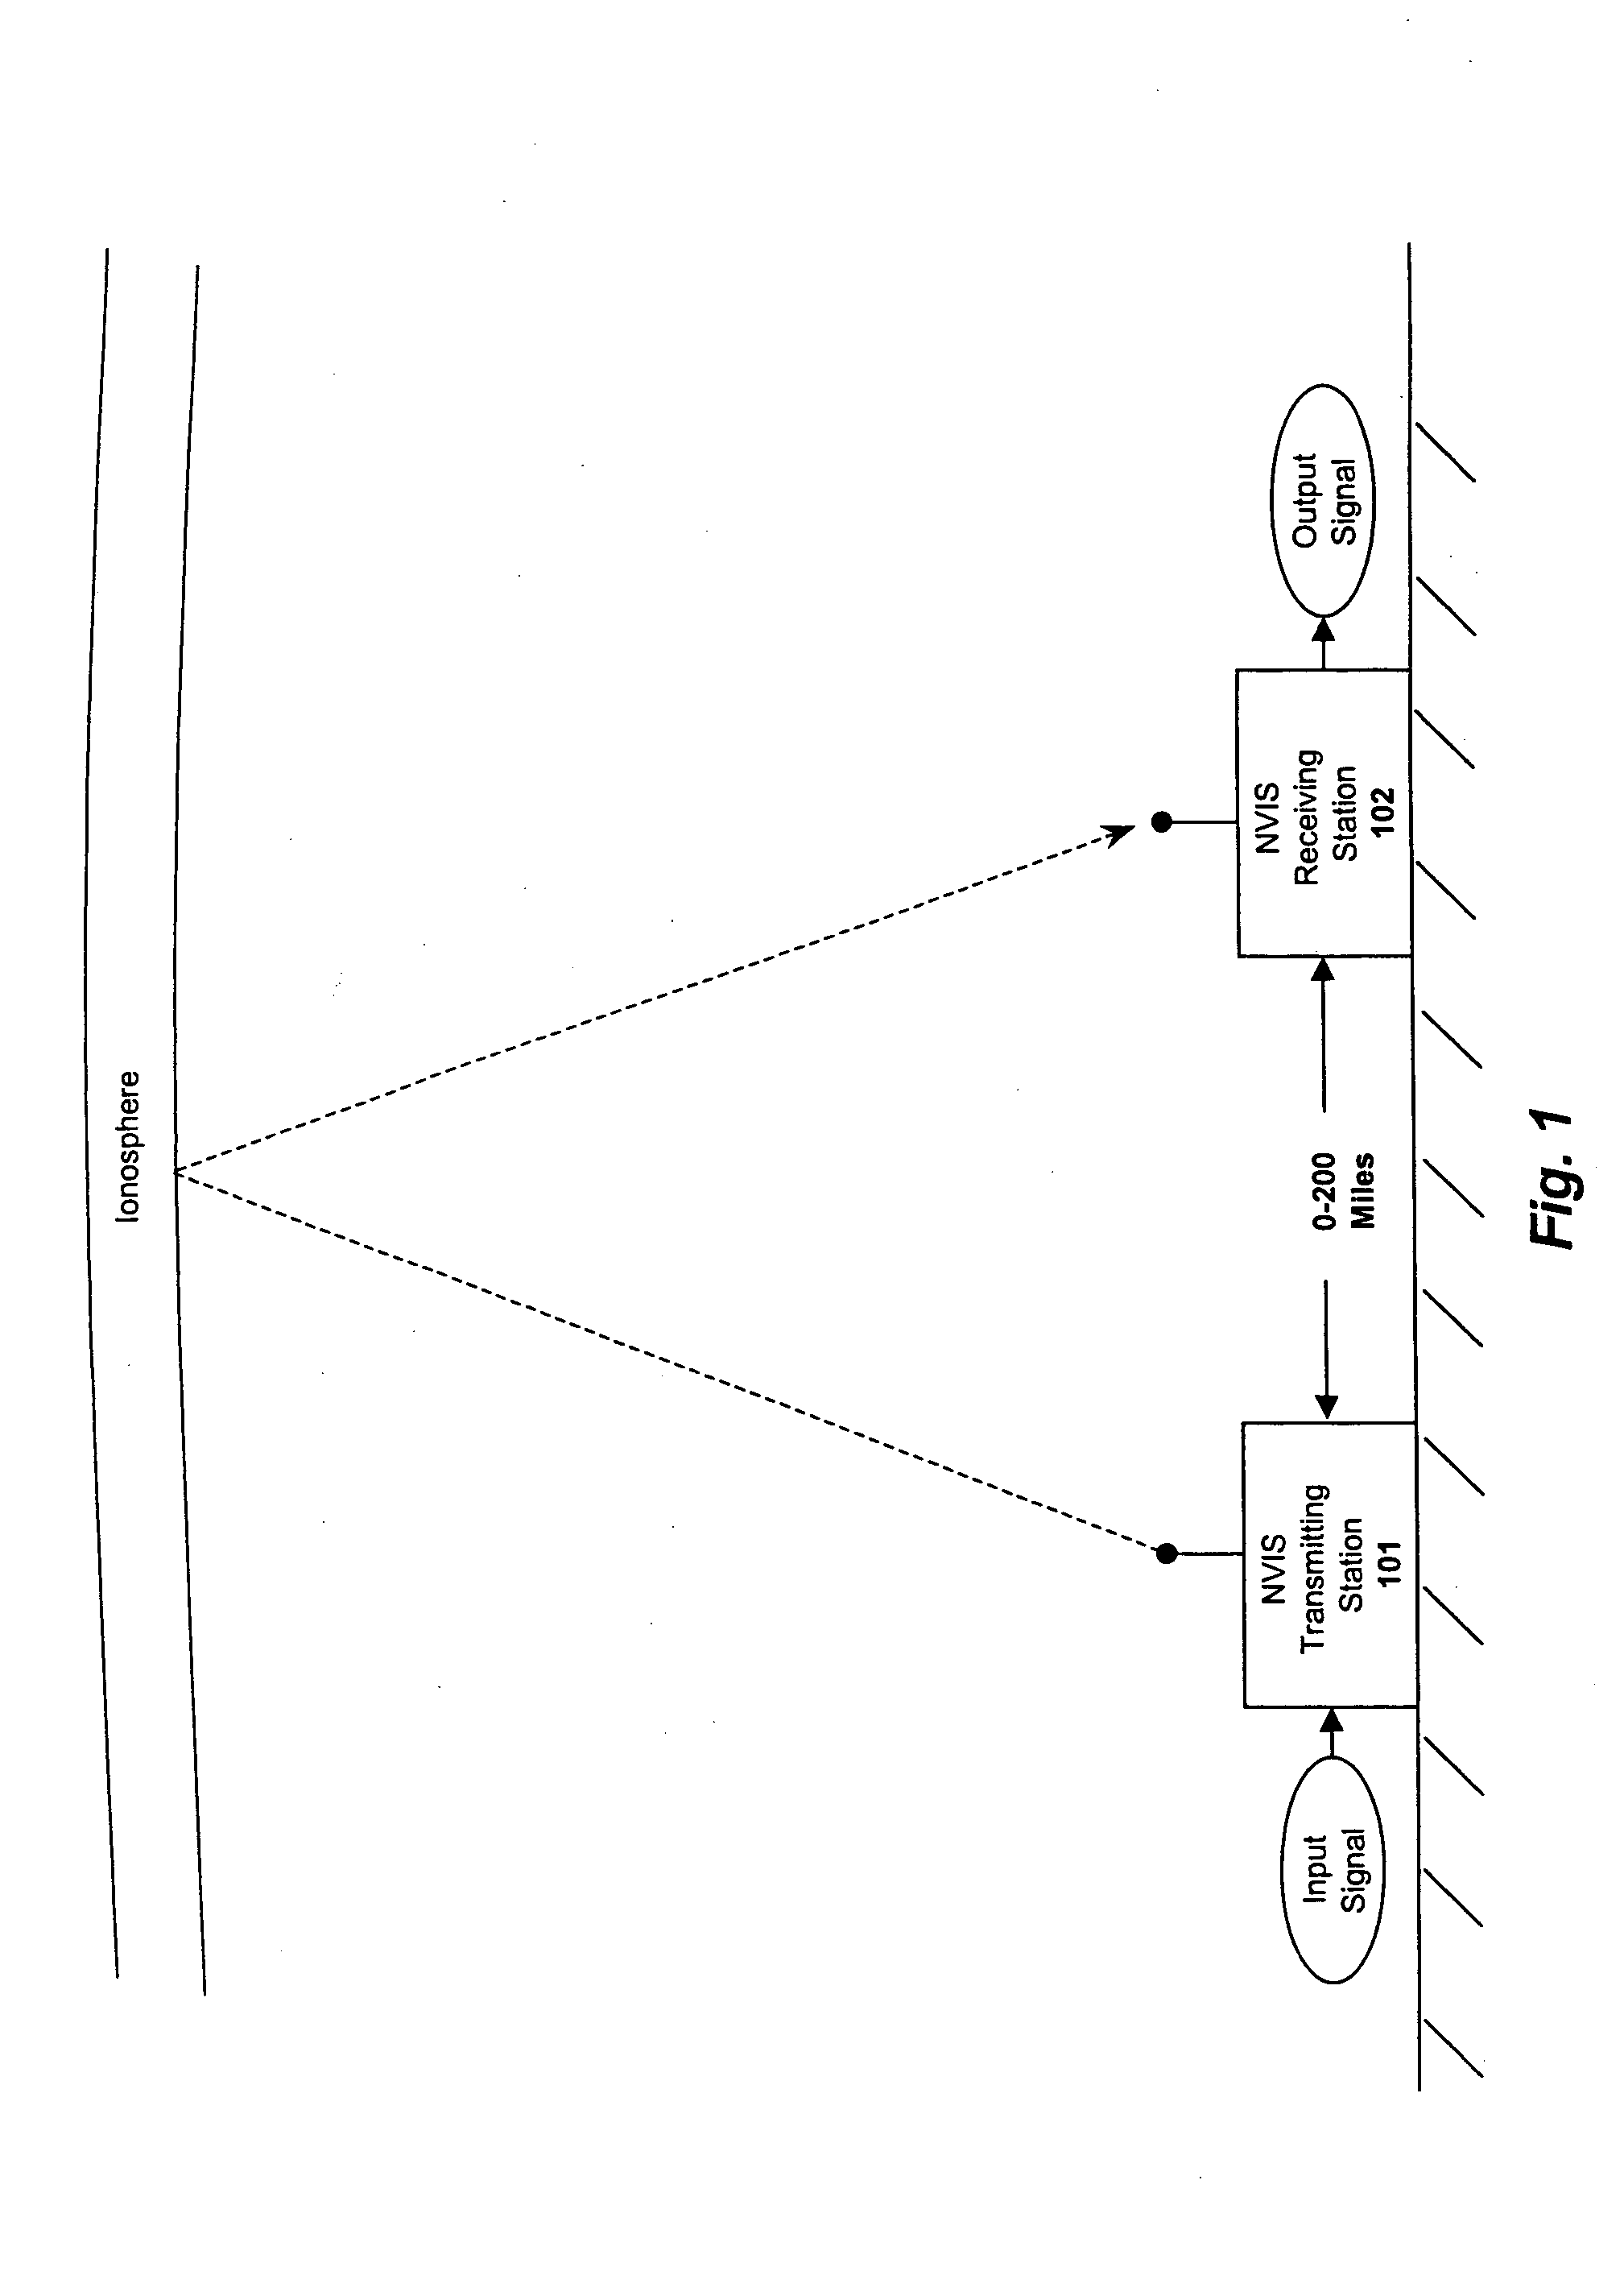 System and method for enhancing near vertical incidence skywave ("NVIS") communication using space-time coding